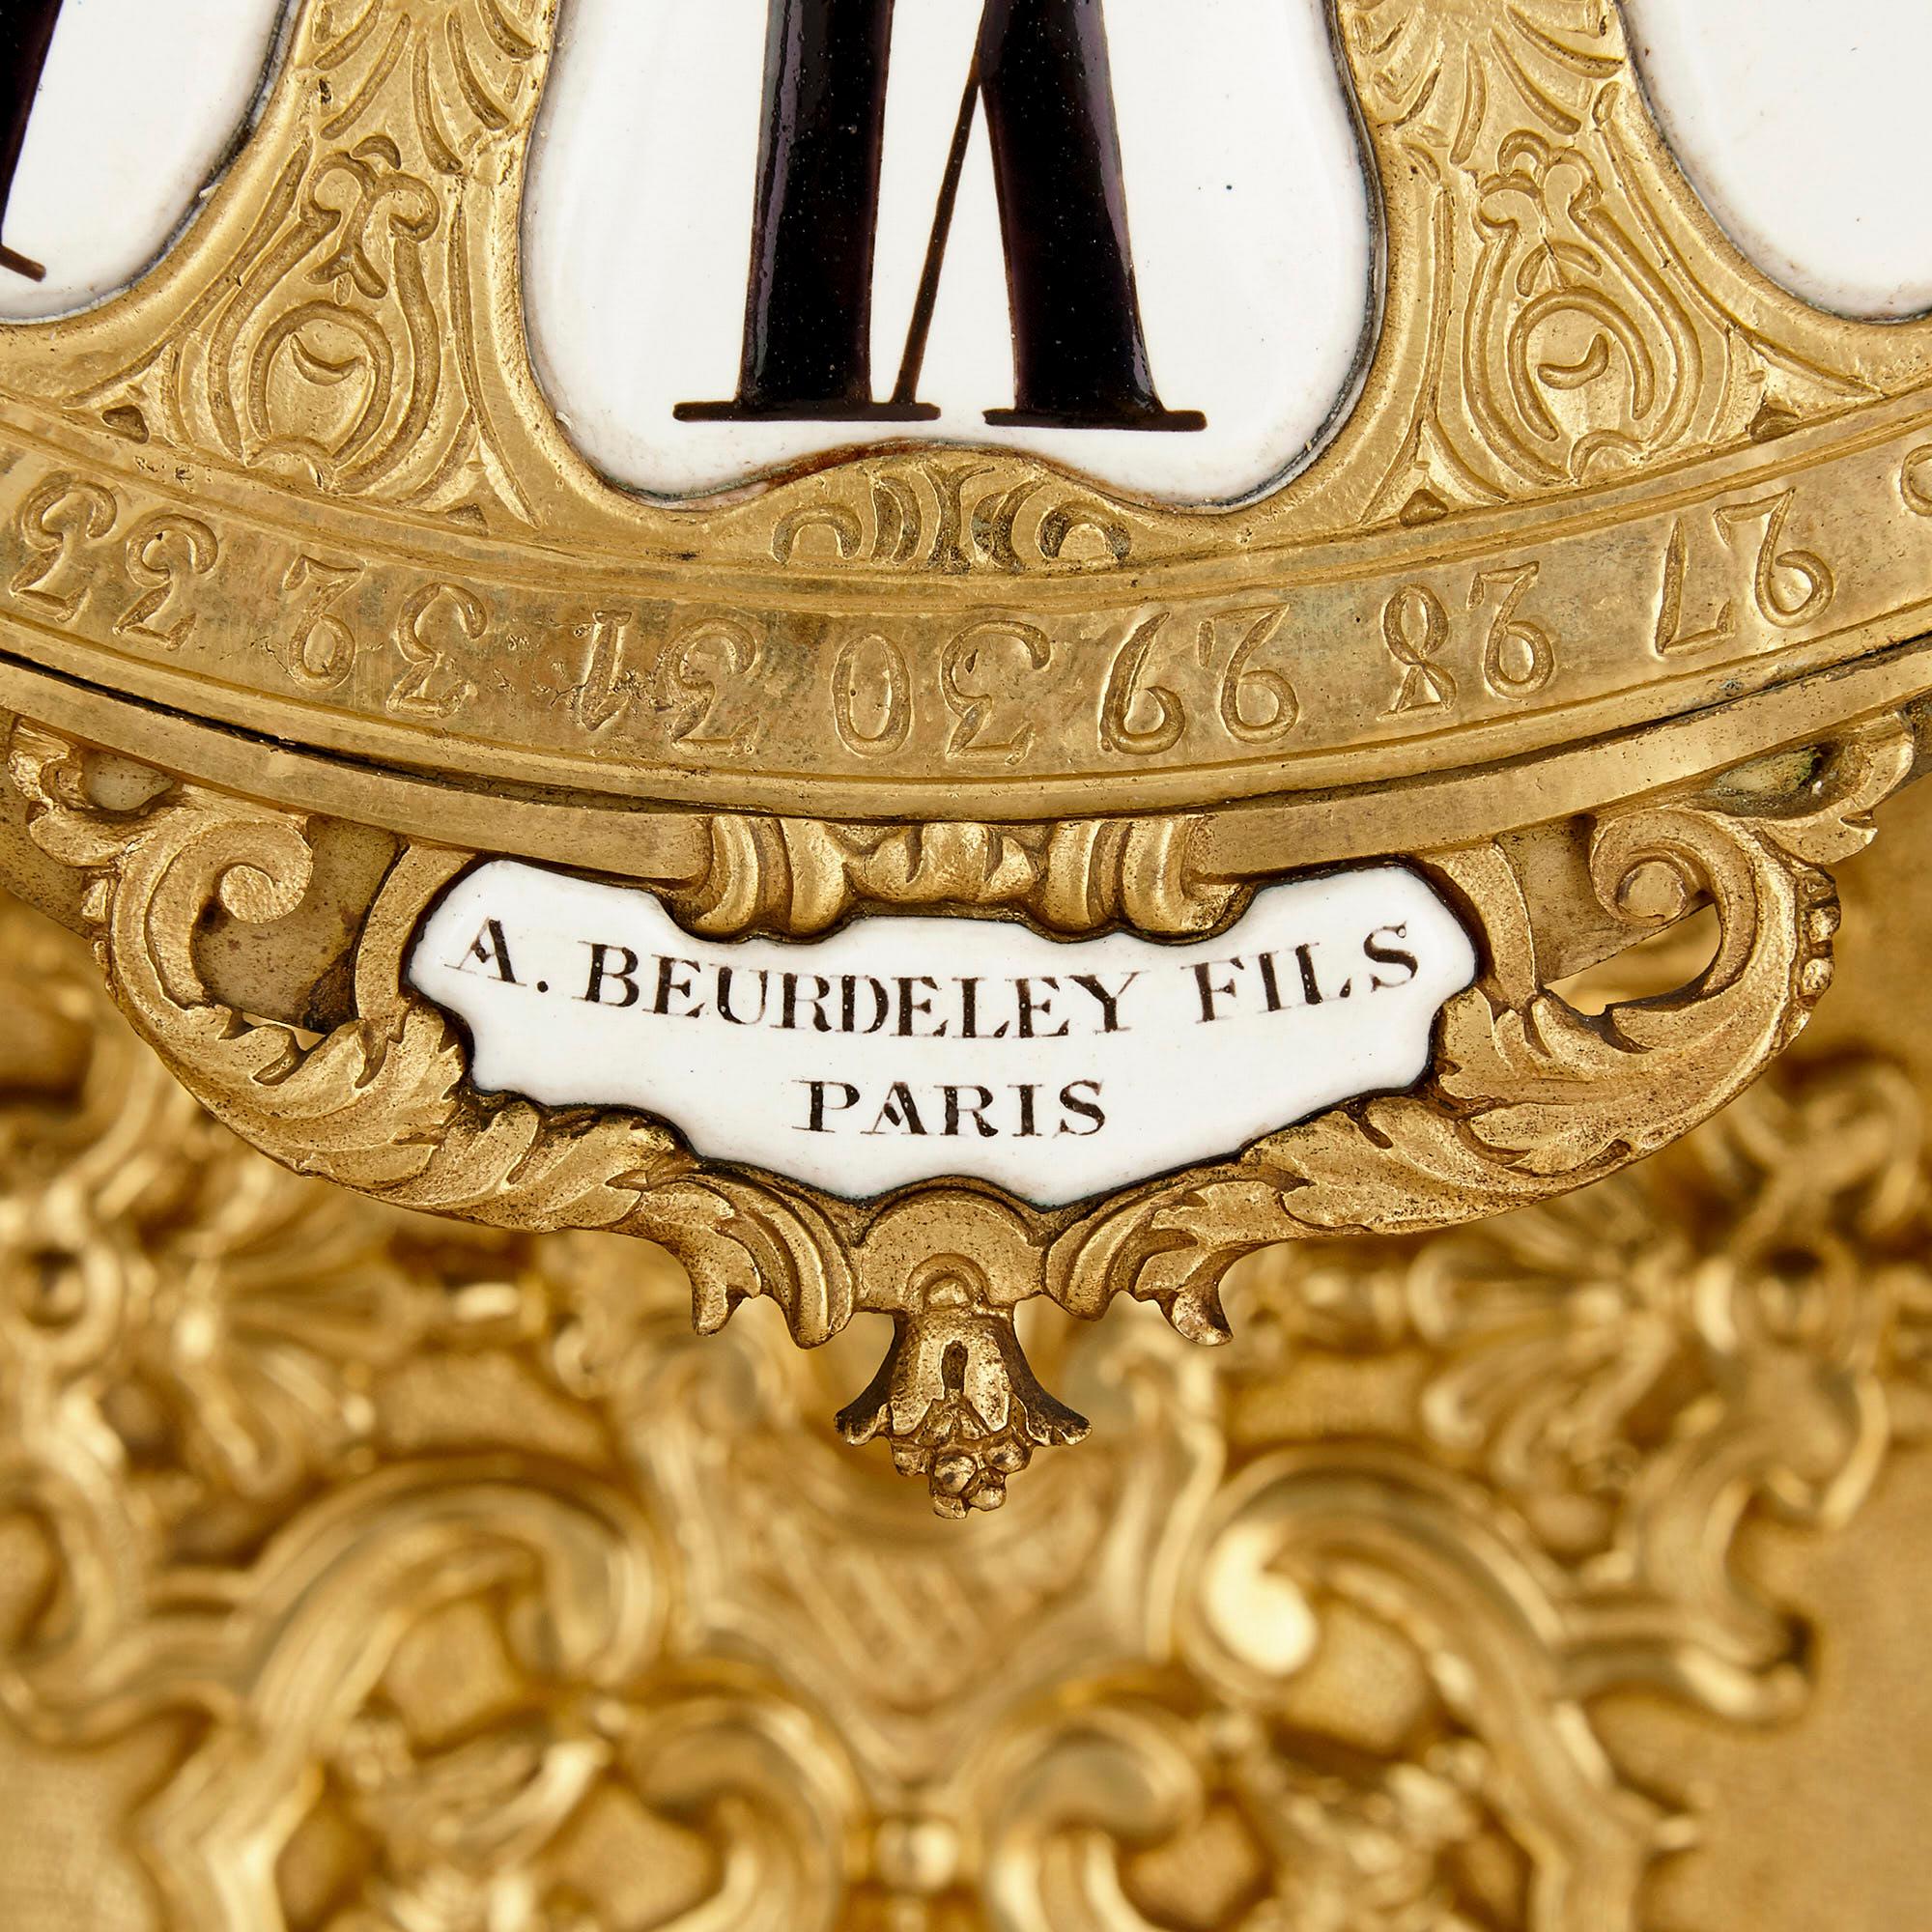 Ormolu Very Large Louis XV Style Gilt Bronze Mantel Clock by Beurdeley For Sale